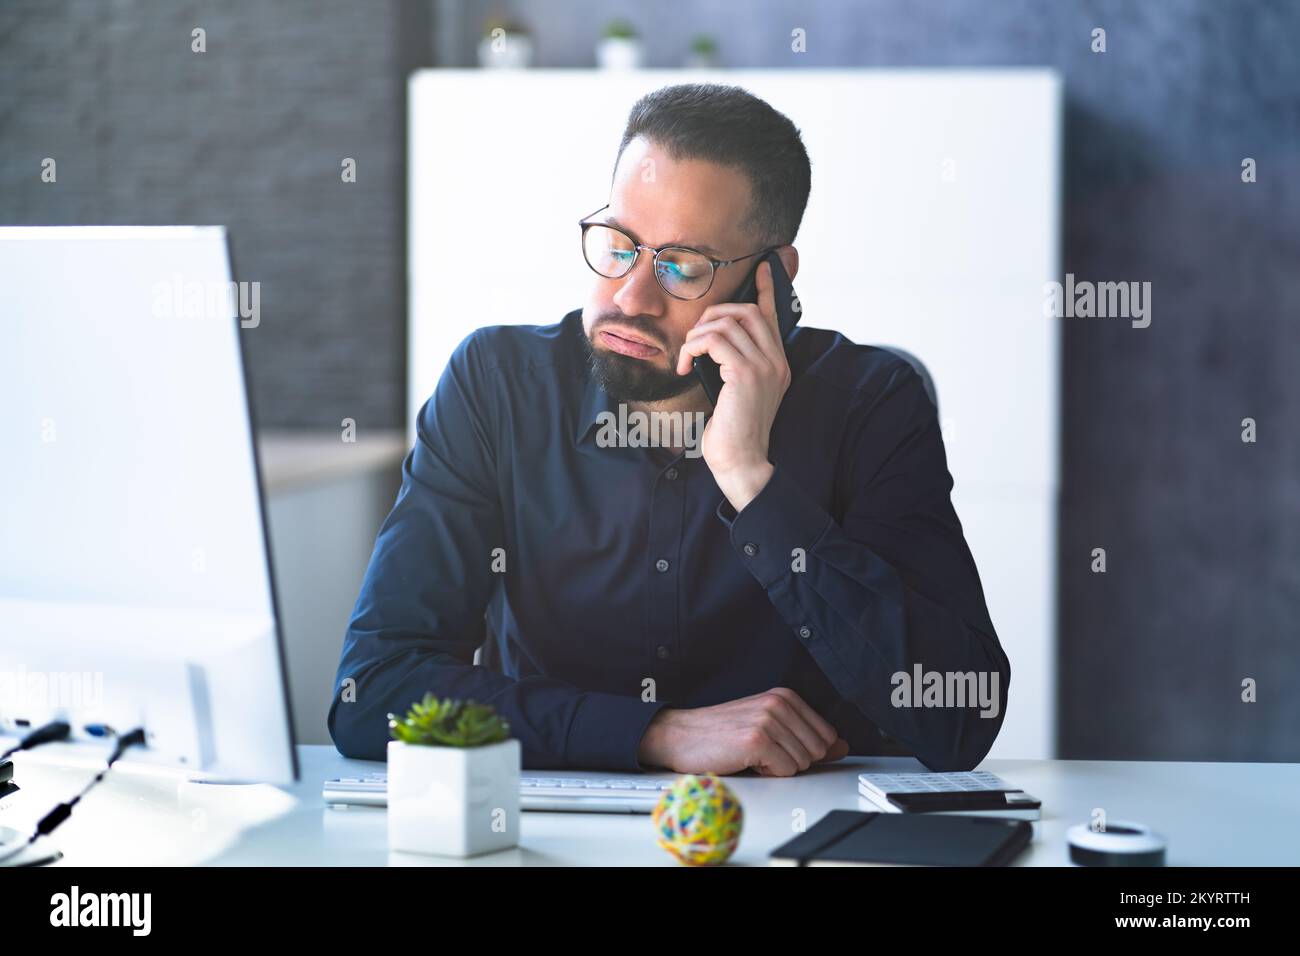 Male Man Talking On Mobile Phone Or Smartphone Stock Photo